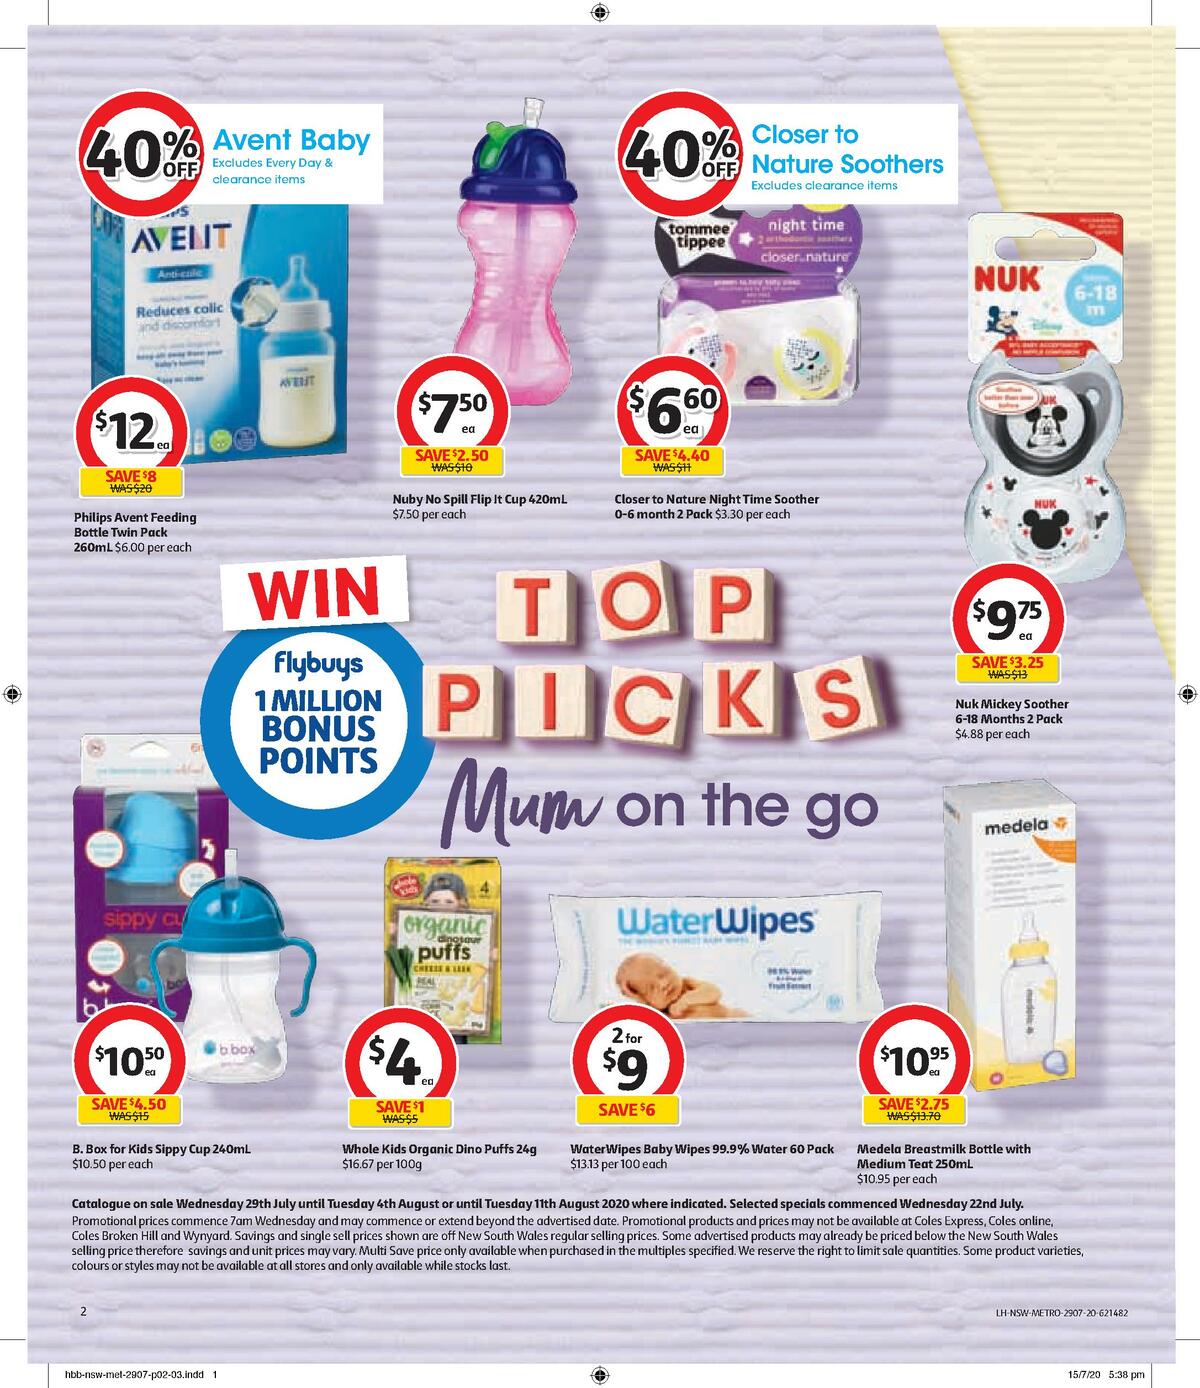 Coles Health & Beauty Catalogues from 29 July